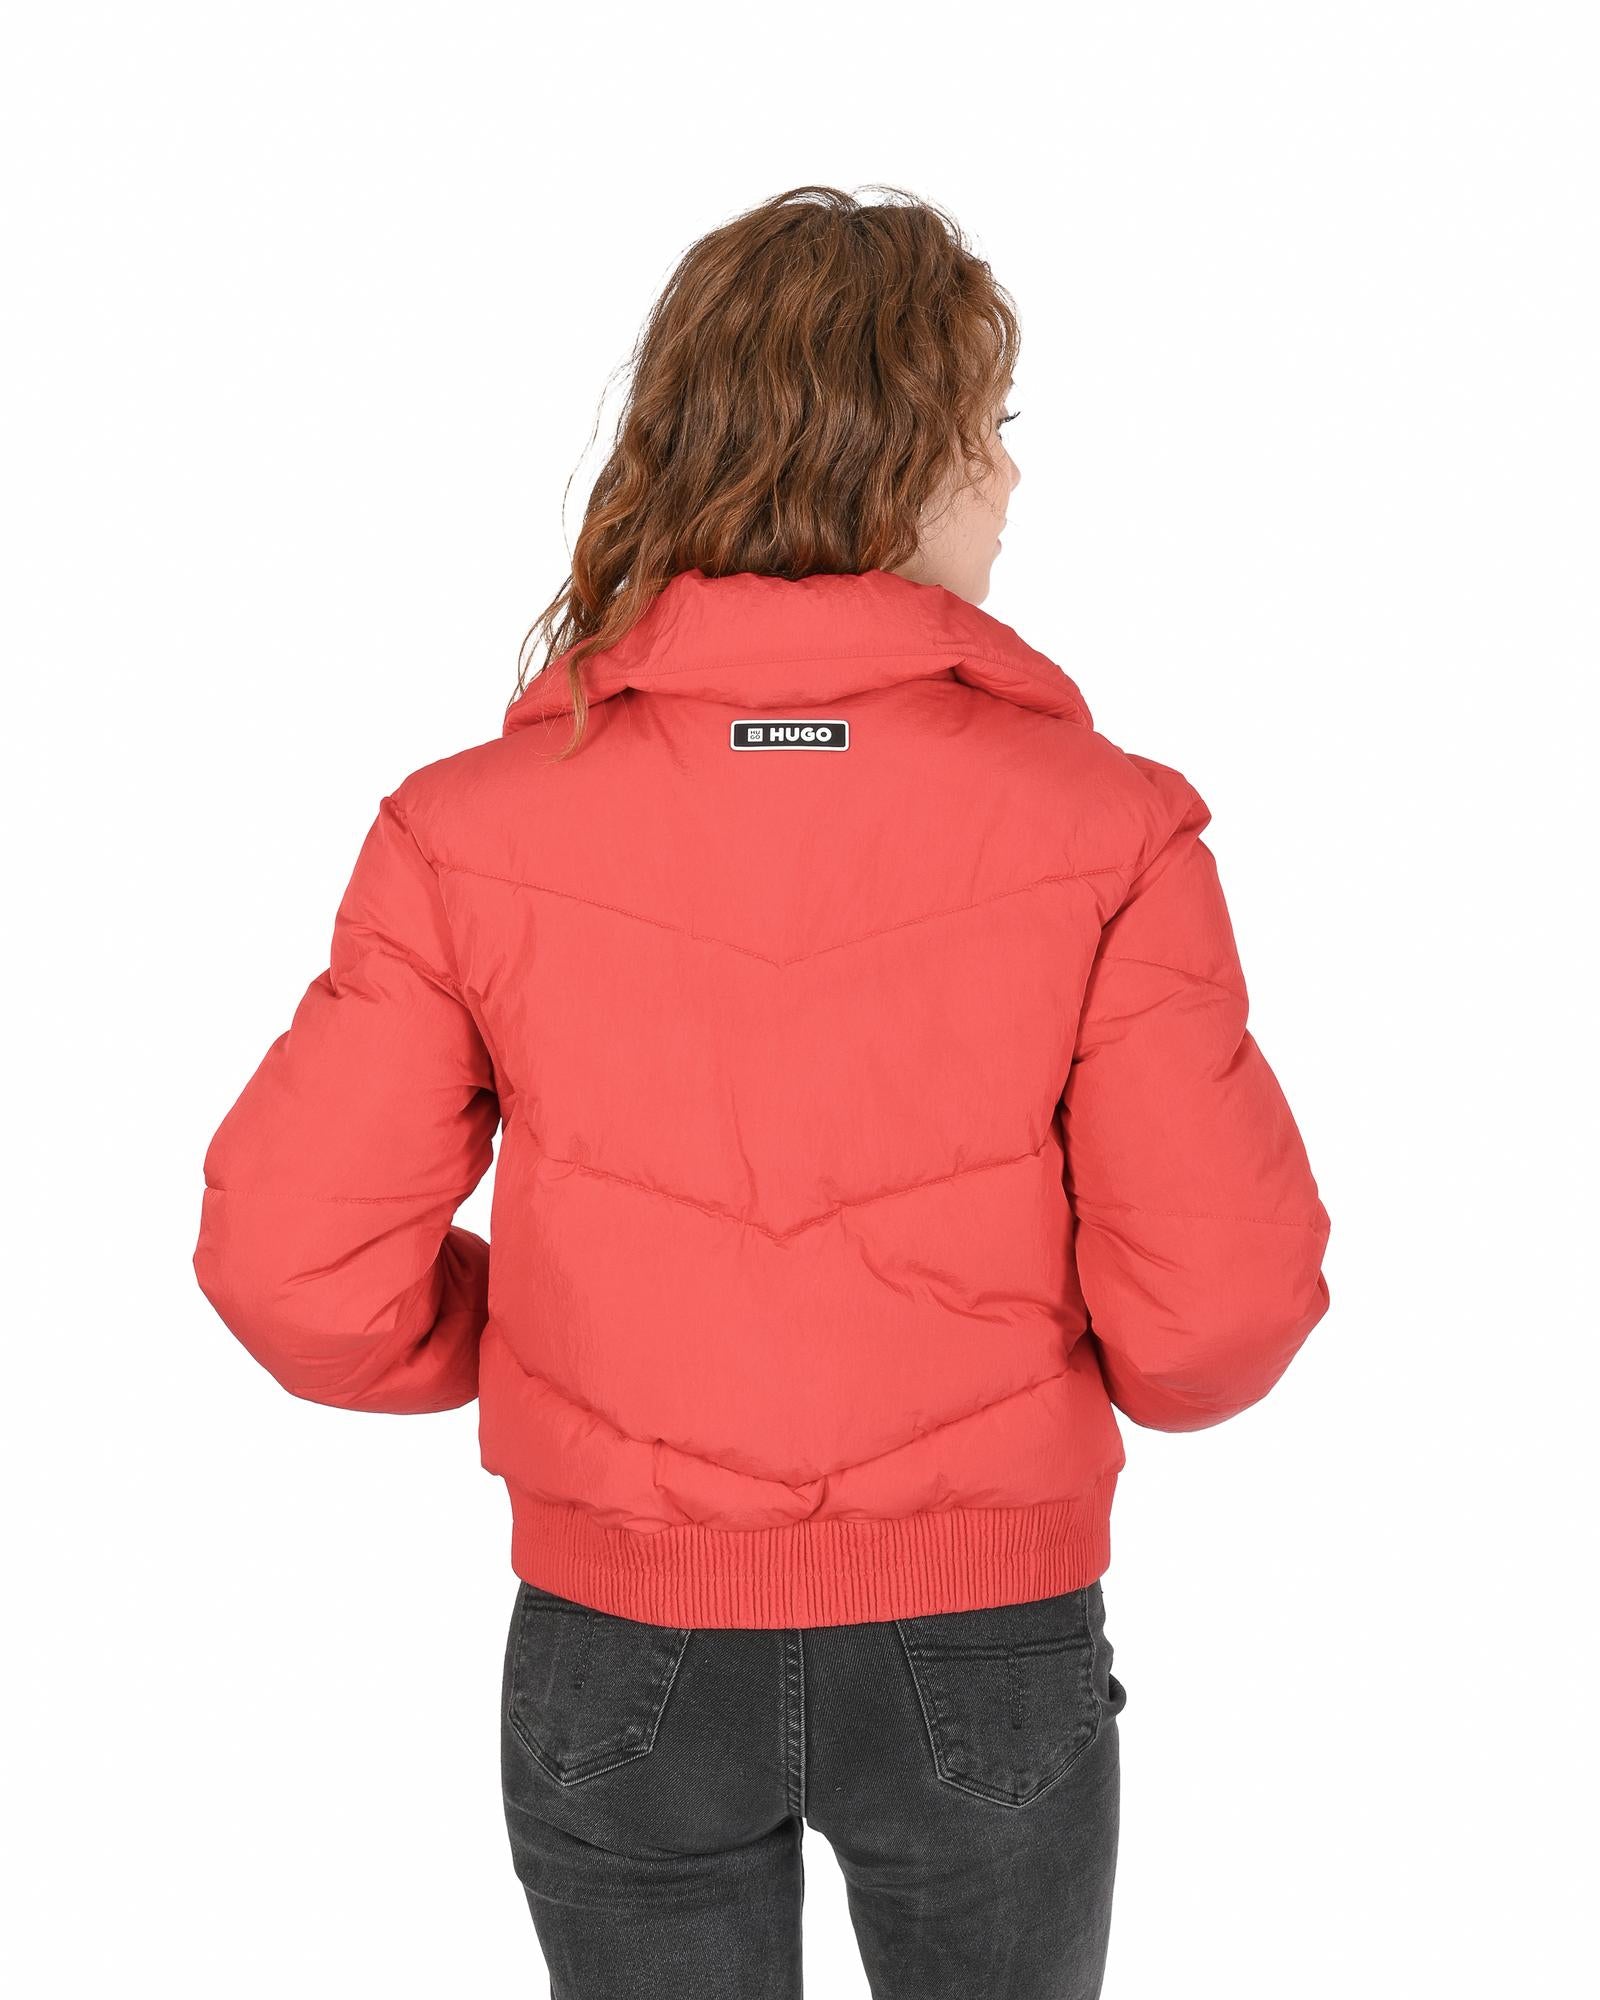 Women's Red Polyamide Jacket in Red - XS